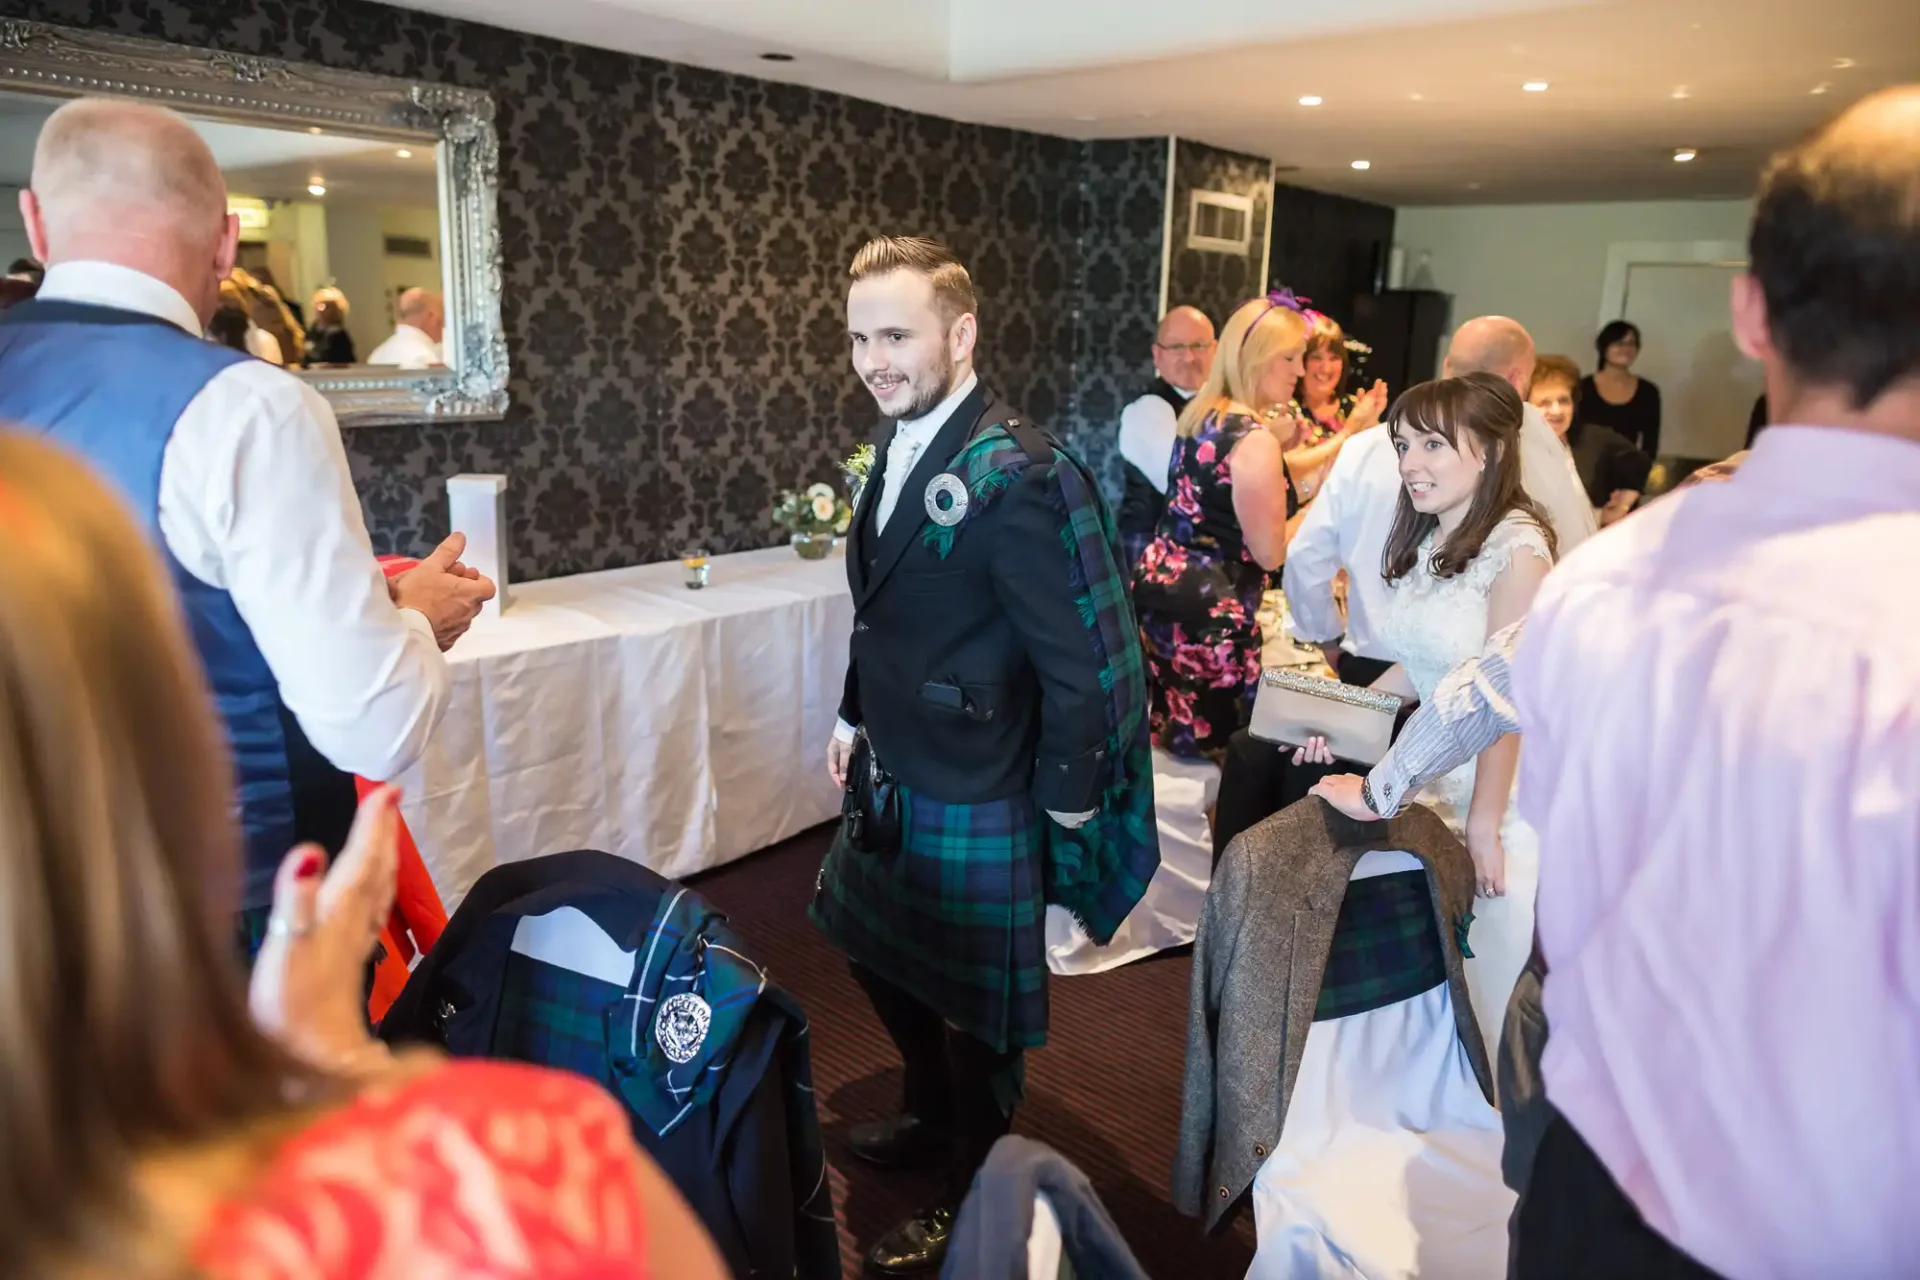 A groom in a tartan kilt smiling as he walks through a crowd of guests at a wedding reception, with attendees clapping and smiling.